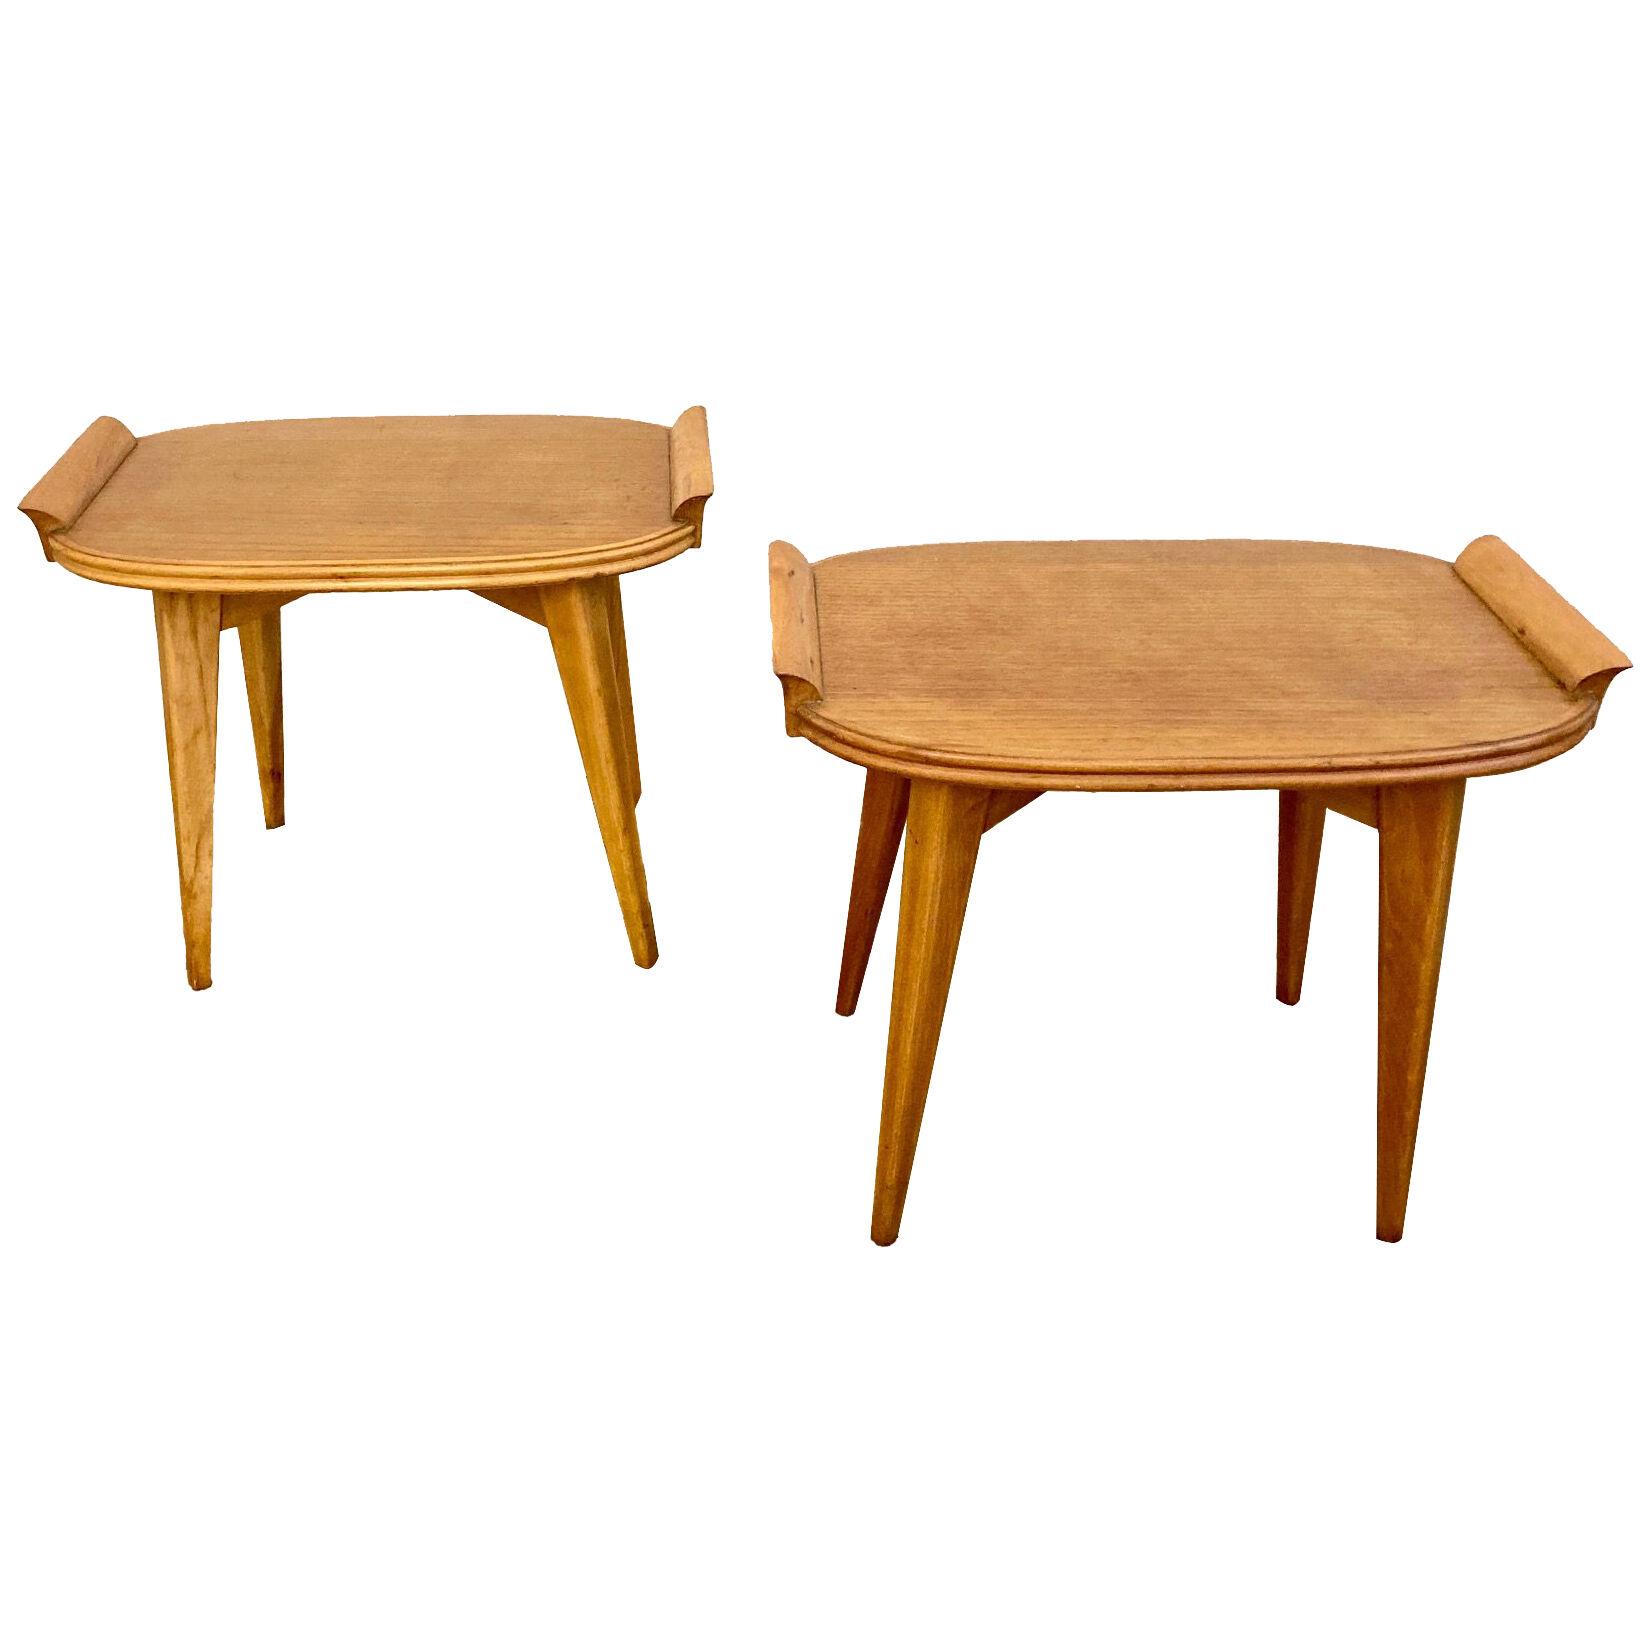 Pair of small side tables